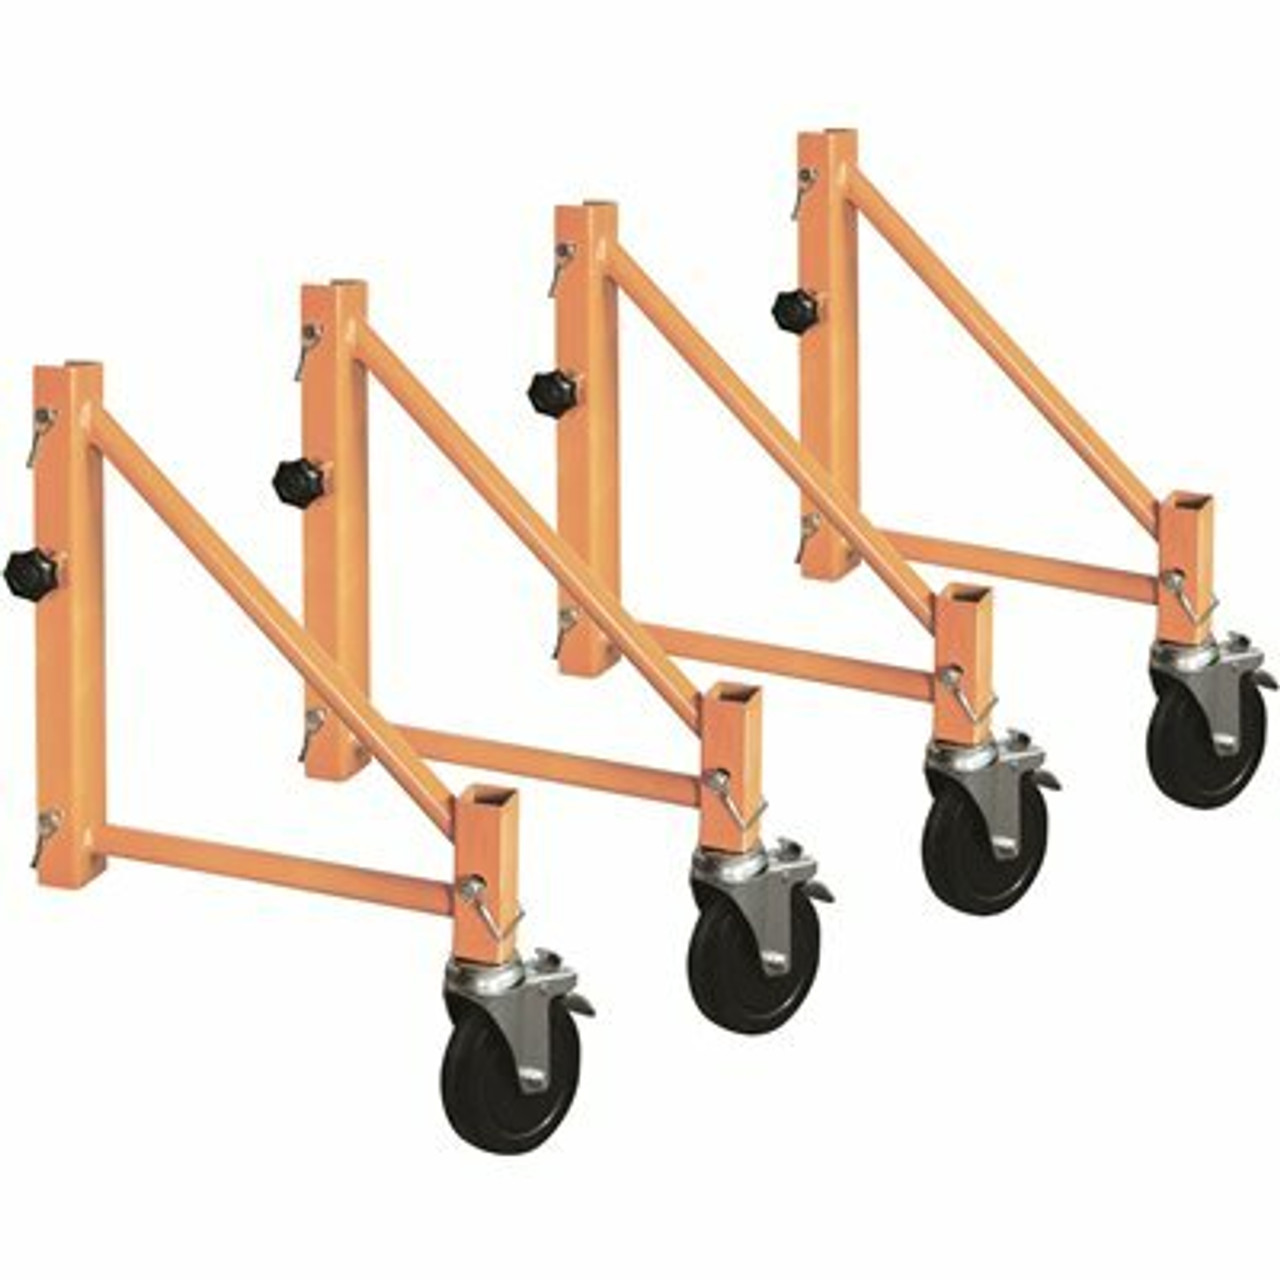 24 In. X 9 In. Steel Scaffolding Outrigger Set With Caster Wheels And Locking Pins For Maxi Square Baker Scaffold System